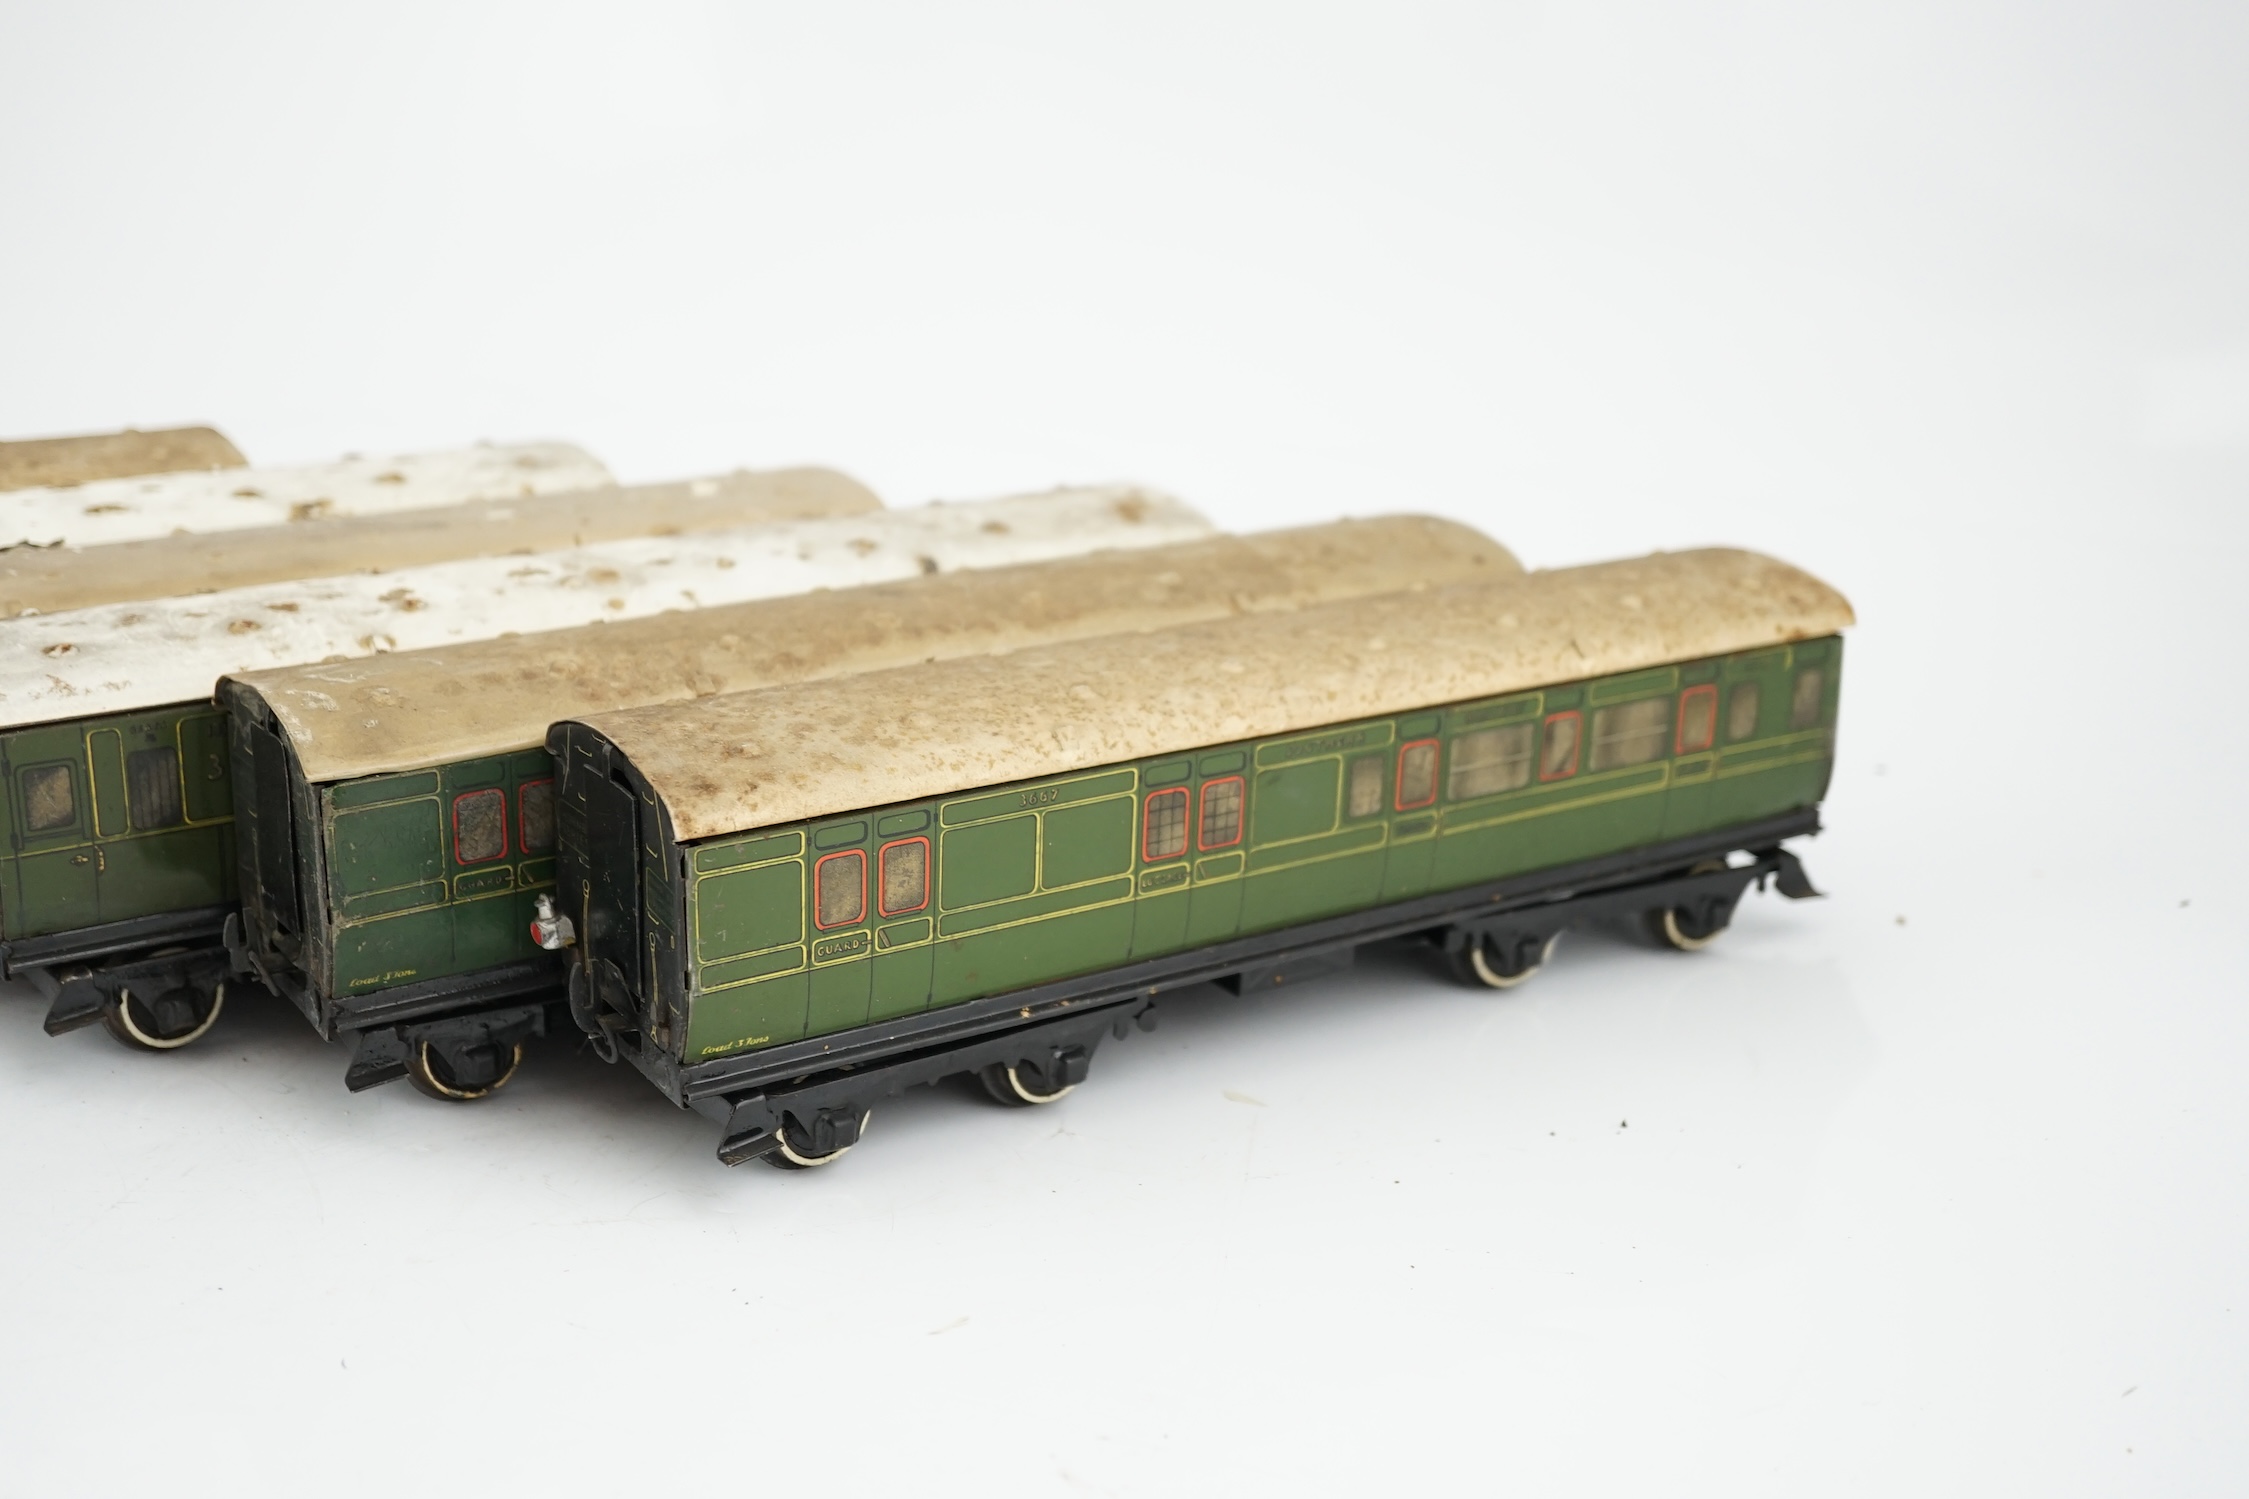 Six Hornby 0 gauge tinplate No.2 coaches in Southern Railway livery, one coach adapted to a - Image 11 of 12